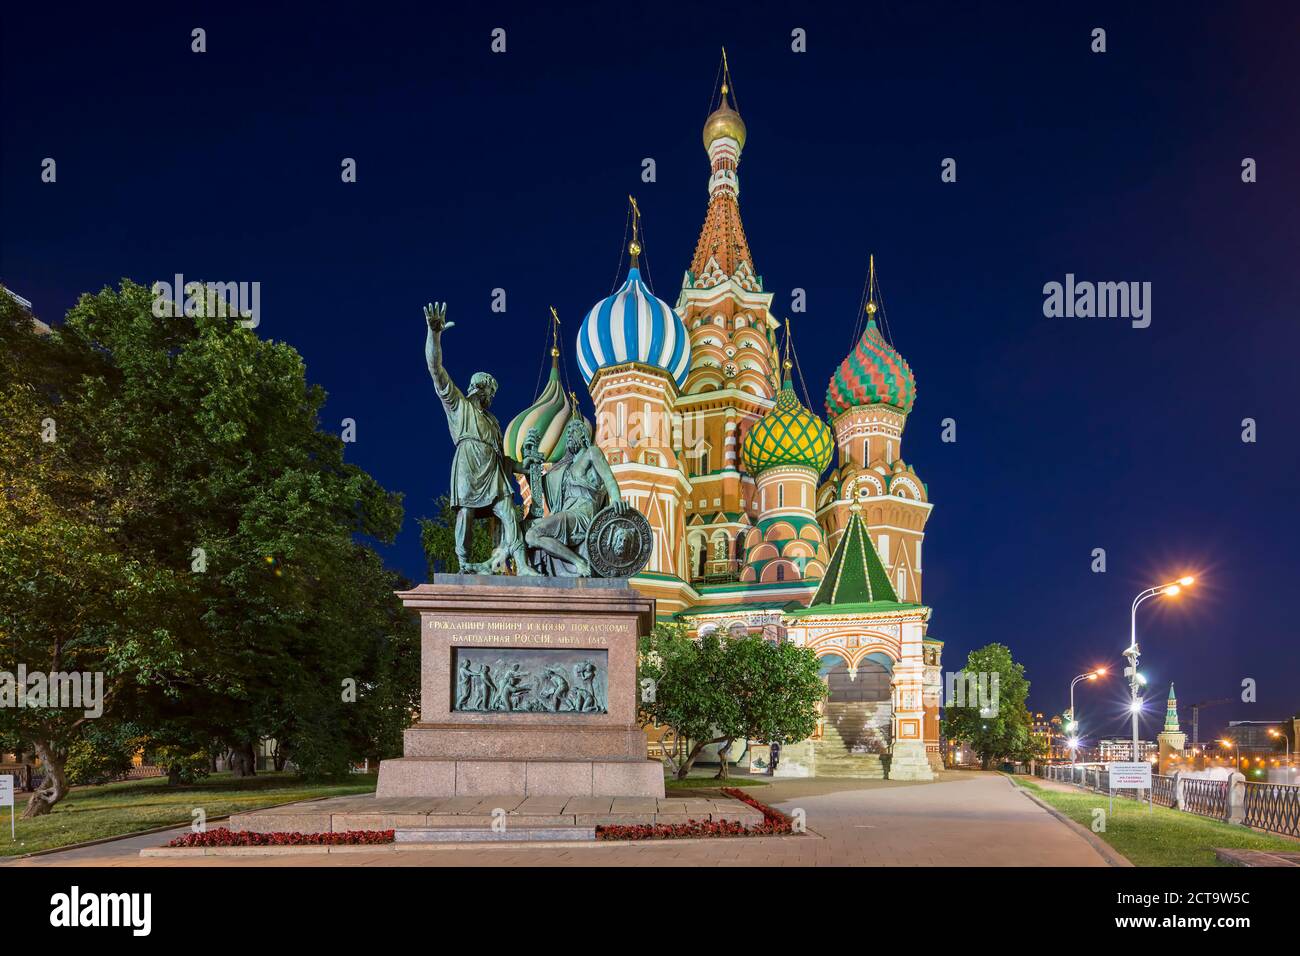 Russia, Central Russia, Moscow, Red Square, Saint Basil's Cathedral and Monument to Minin and Pozharsky at night Stock Photo